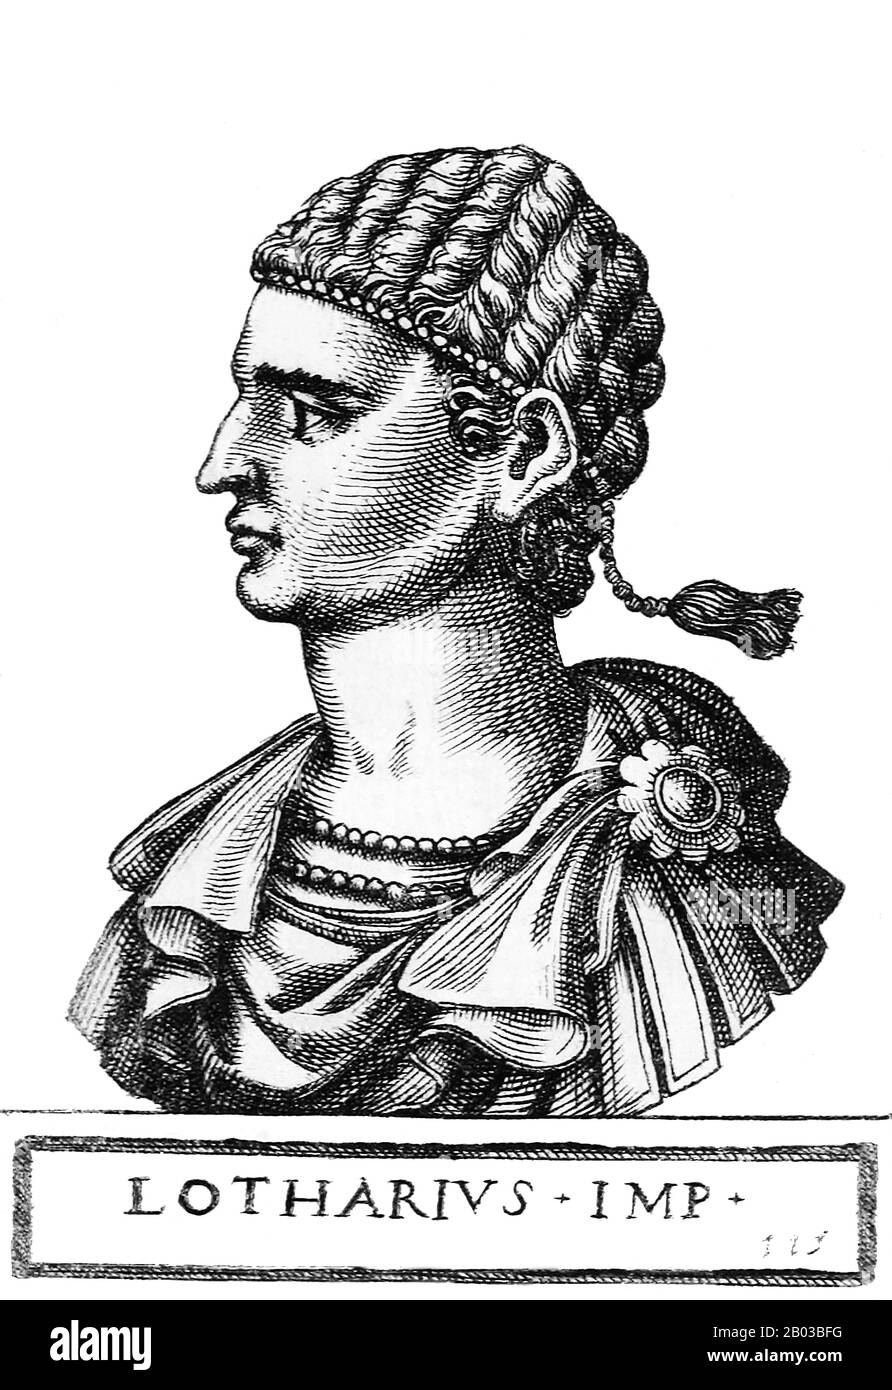 Lothair I (795-855), also known as Lothar I, was the eldest son of Emperor Louis the Pious and grew up in the court of his grandfather, Emperor Charlemagne. When his father died in 840, Lothair ignored all previous plans for partitioning and claimed the whole of the Holy Roman Empire for himself, leading to another civil war which lasted around three years. Stock Photo